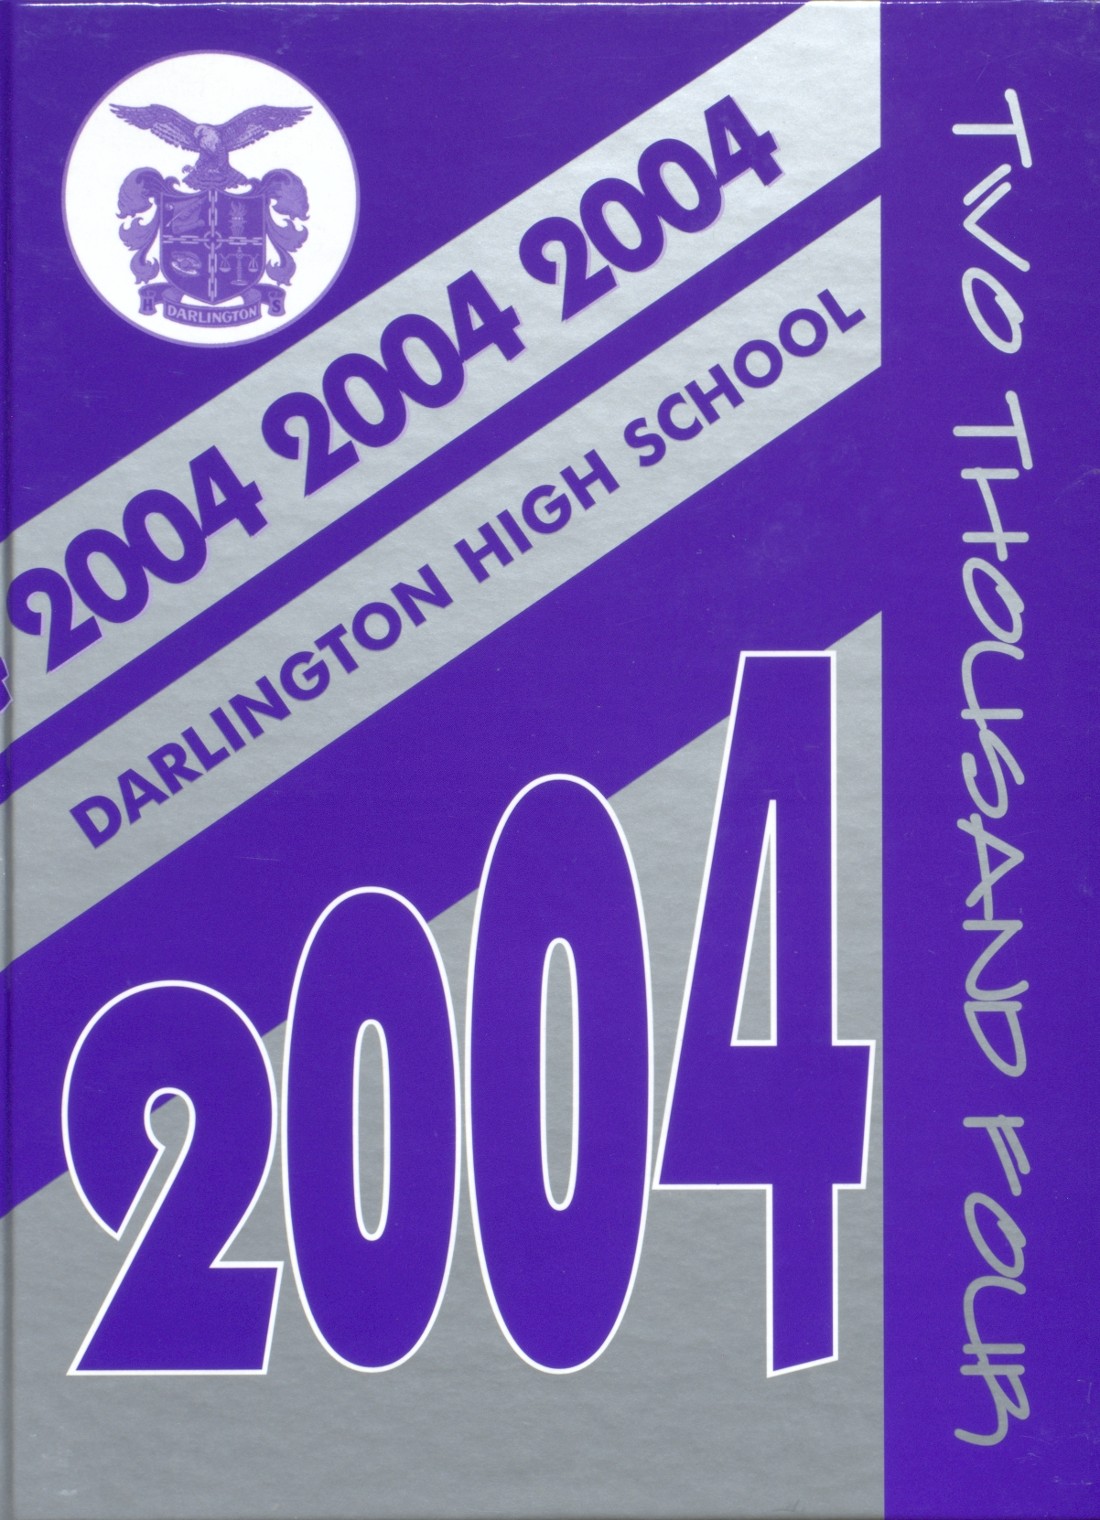 2004 yearbook from Darlington High School from Darlington, South